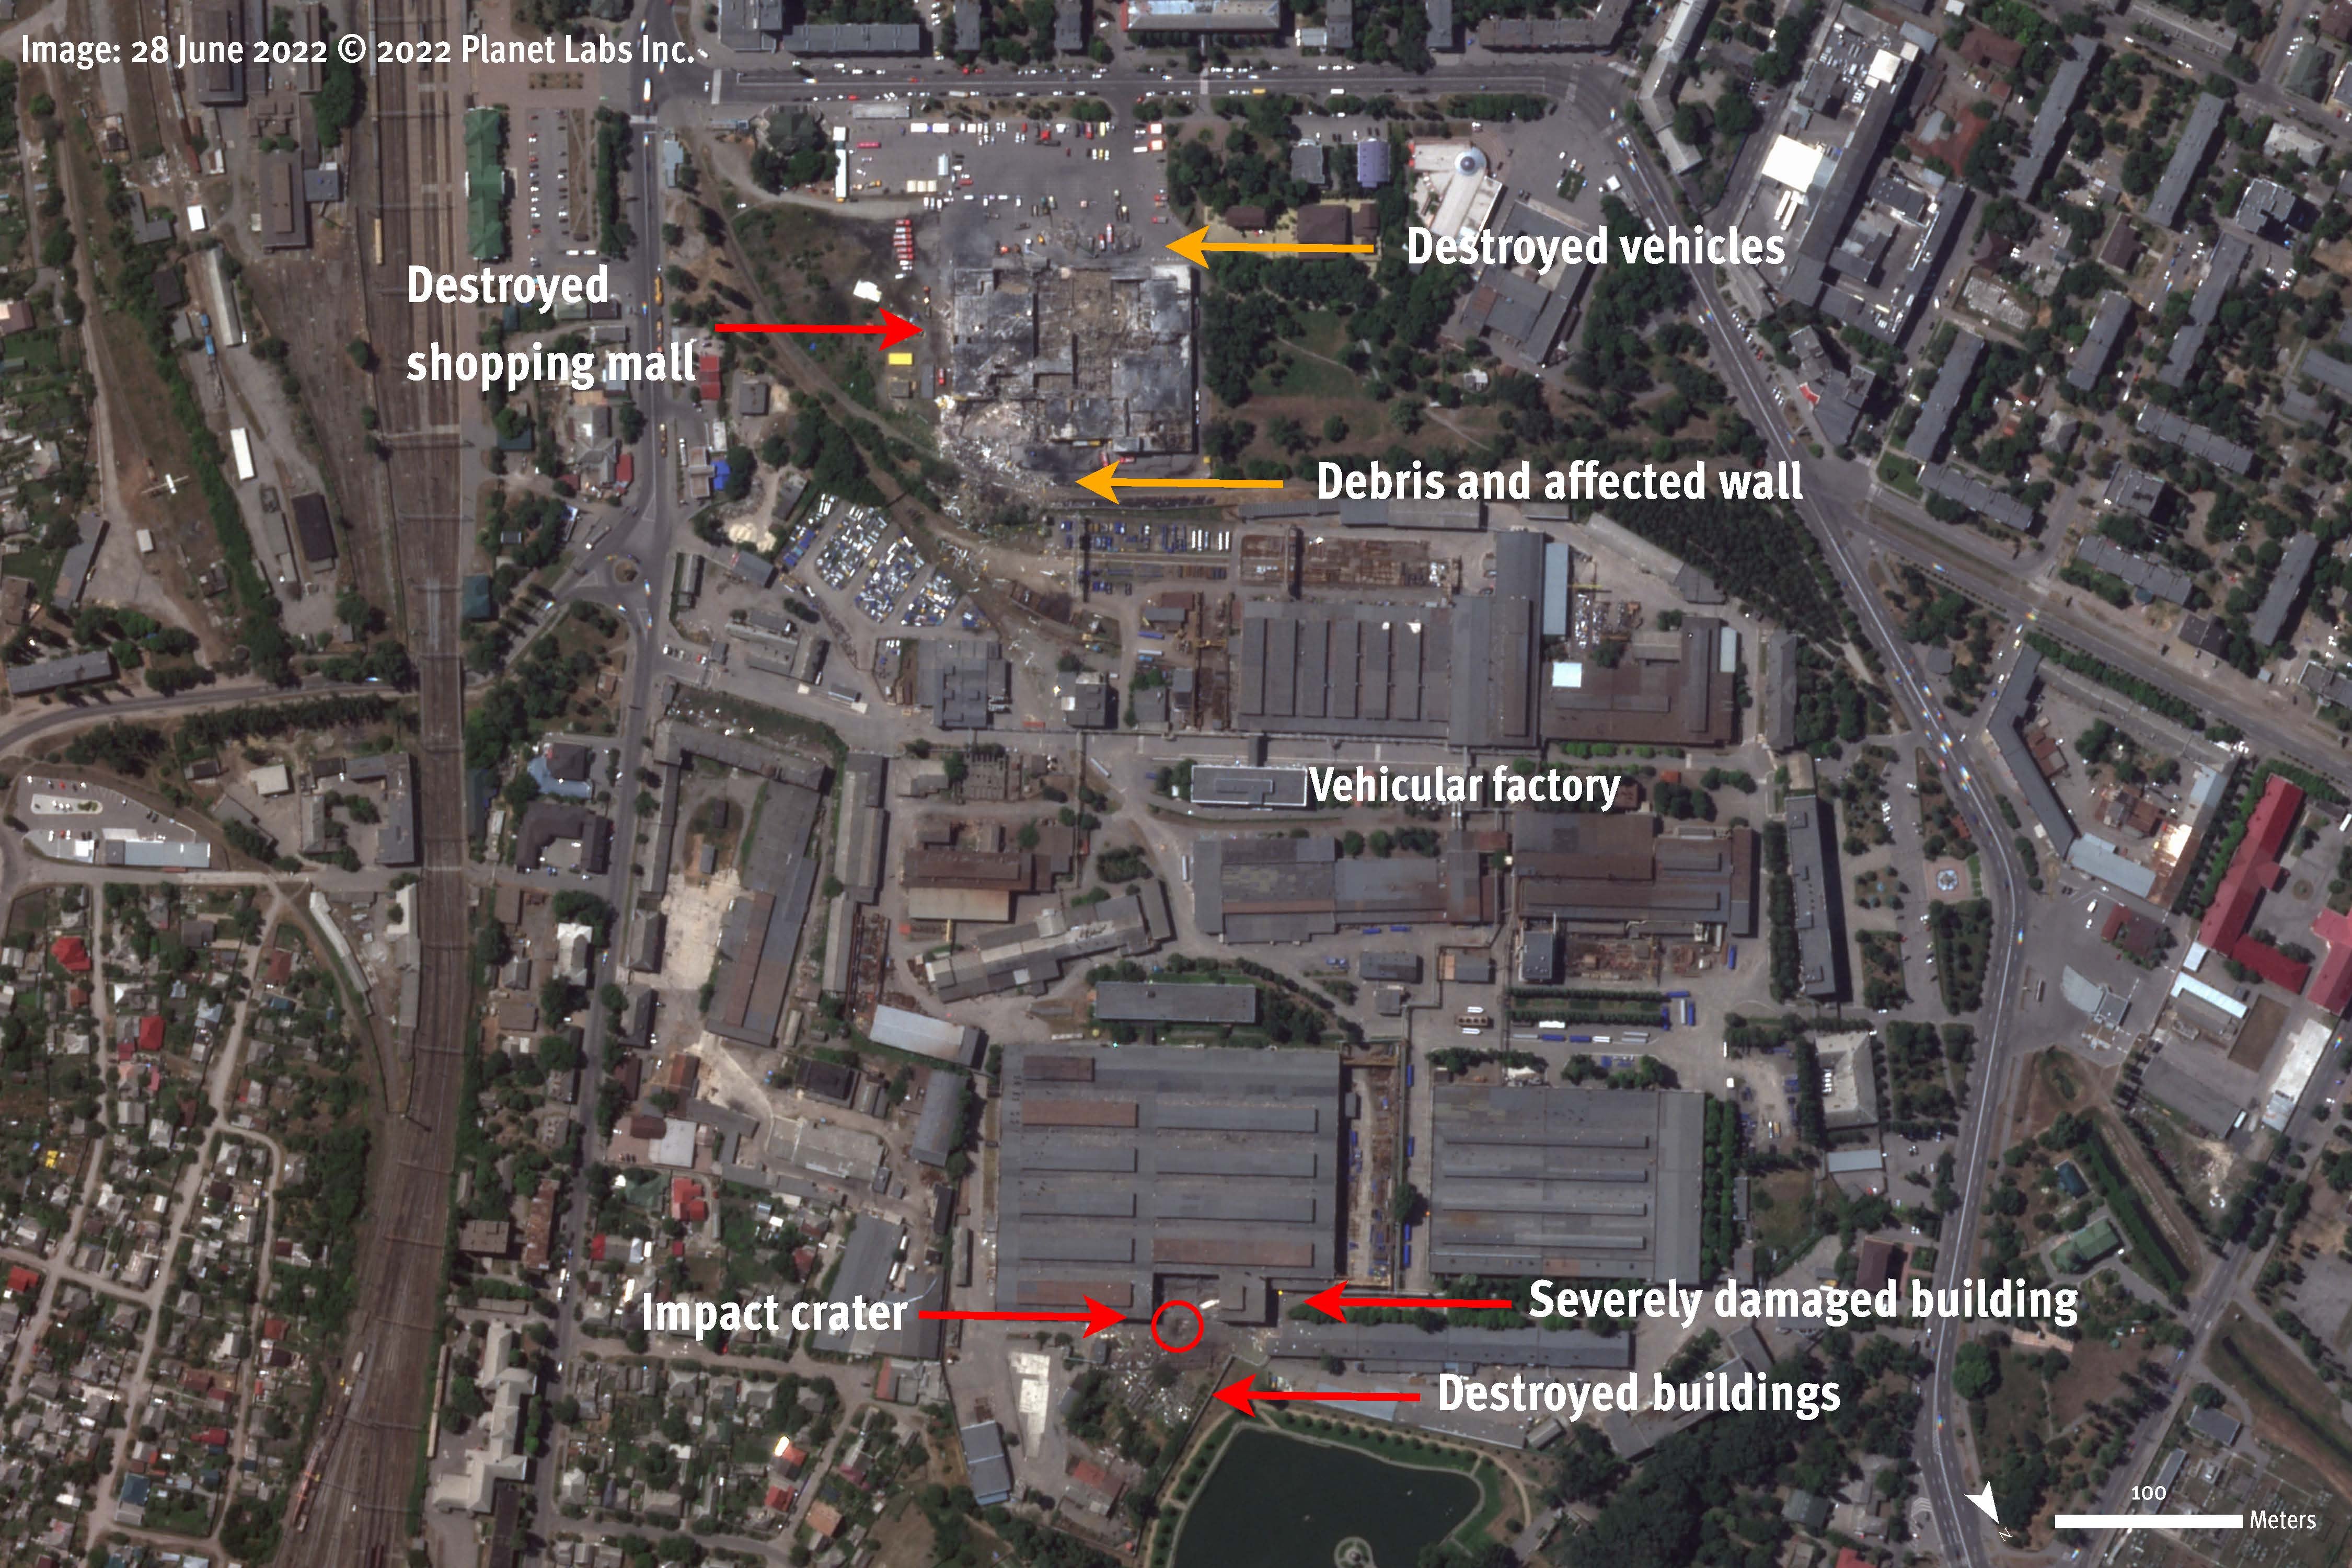 Destruction and damage to the Kremenchuk shopping mall and adjacent factory observed after the strike on June 27, 2022.